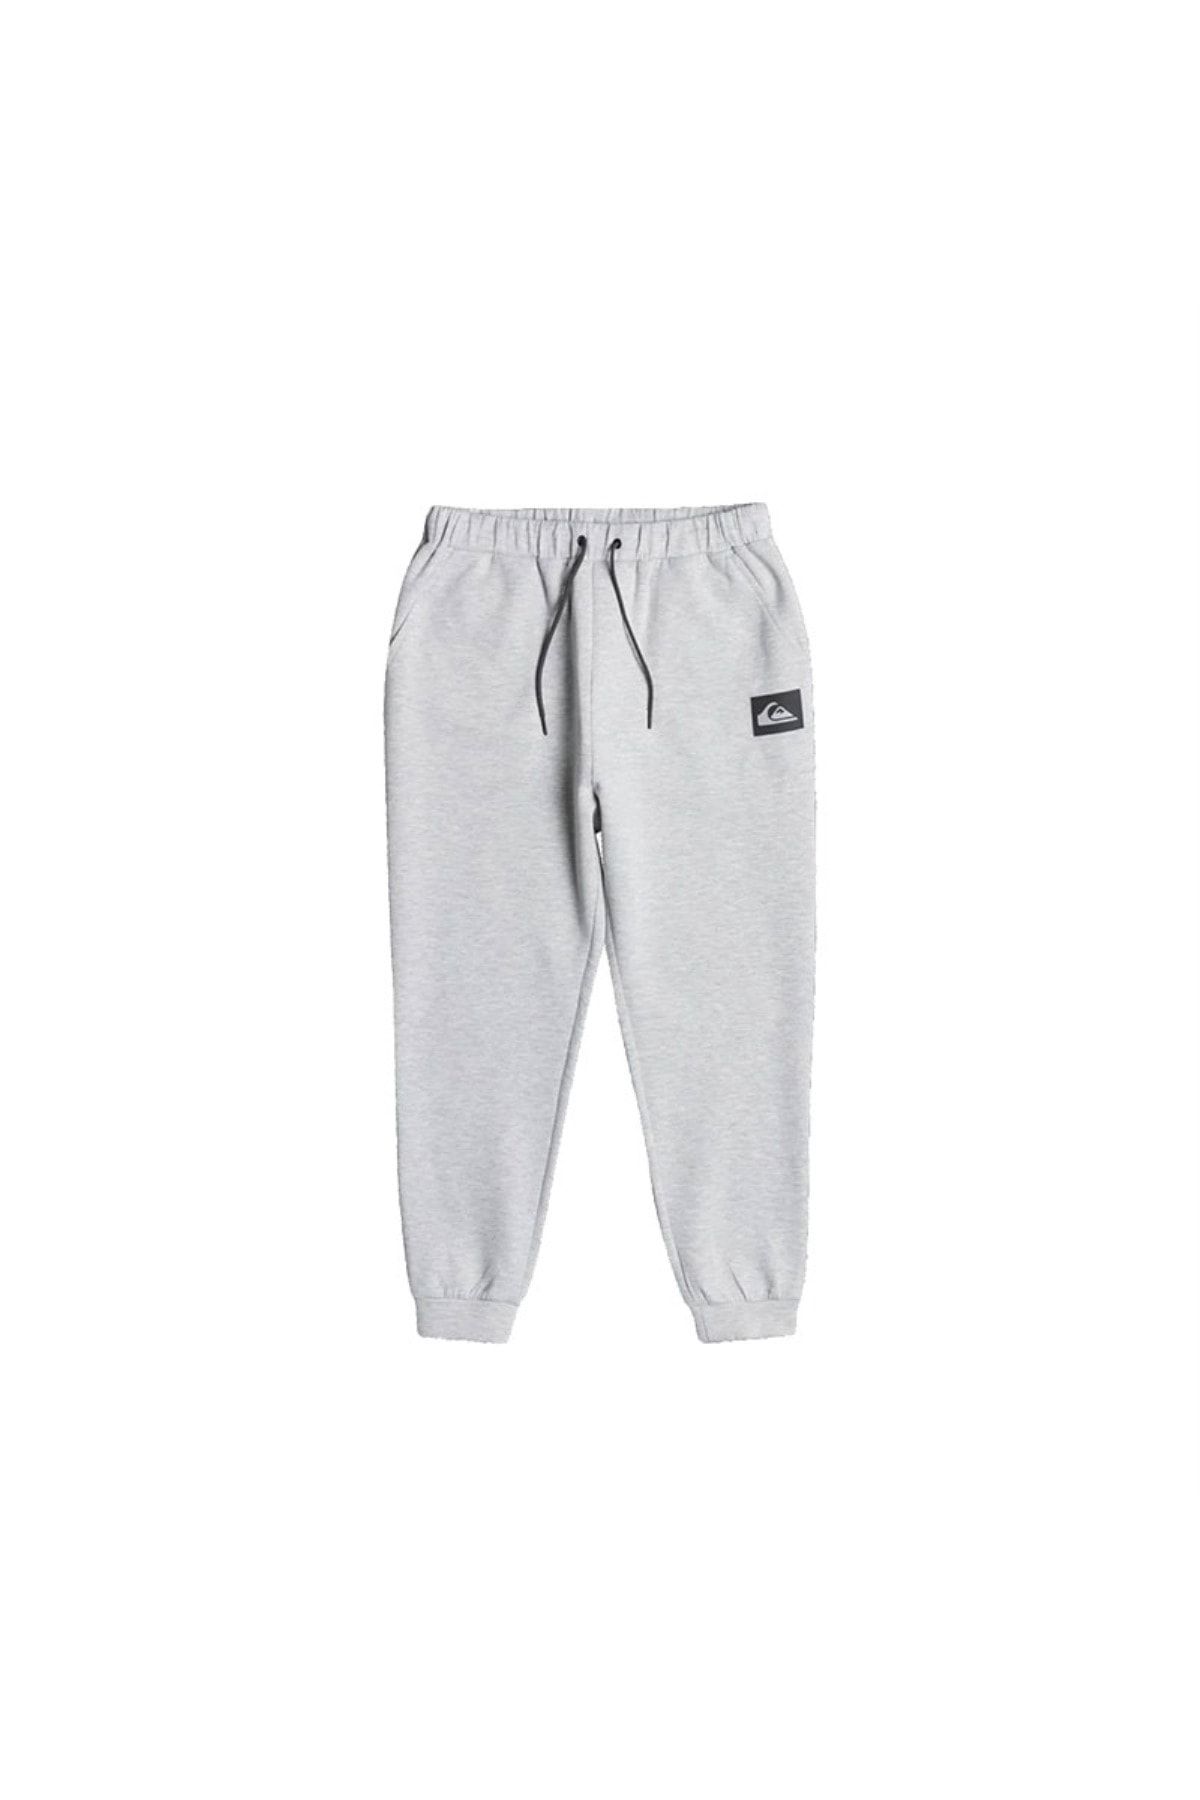 Quiksilver Stepoff Pant